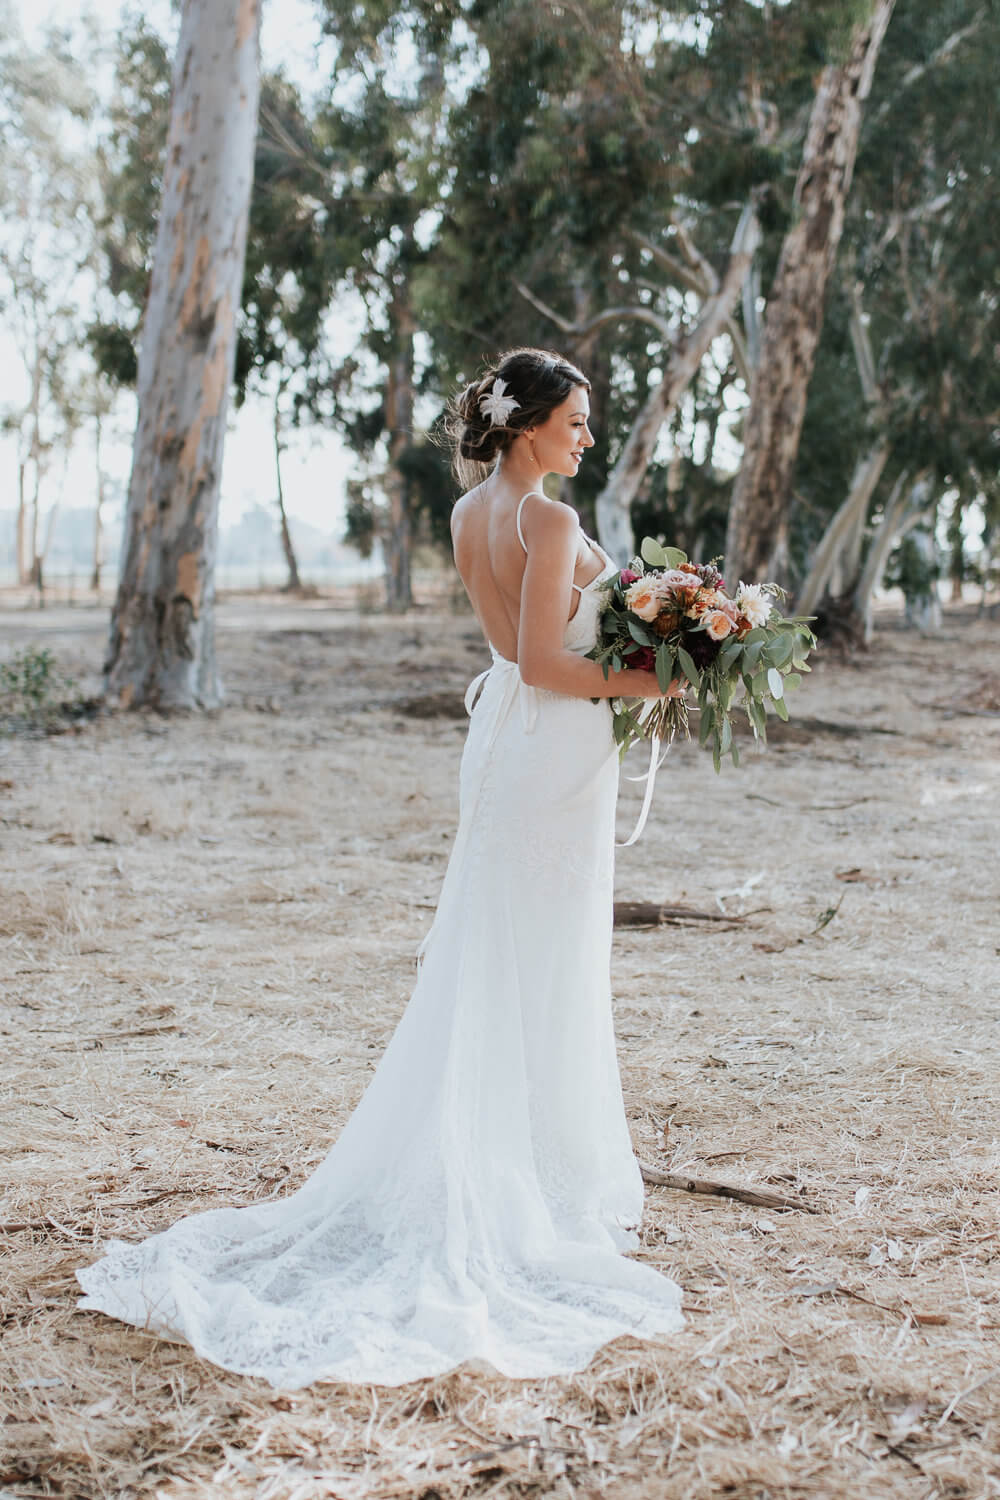 Bridal and wedding styled shoot at Ardenwood Farms in Fremont California. Vintage details, flower ideas, natural light photography.